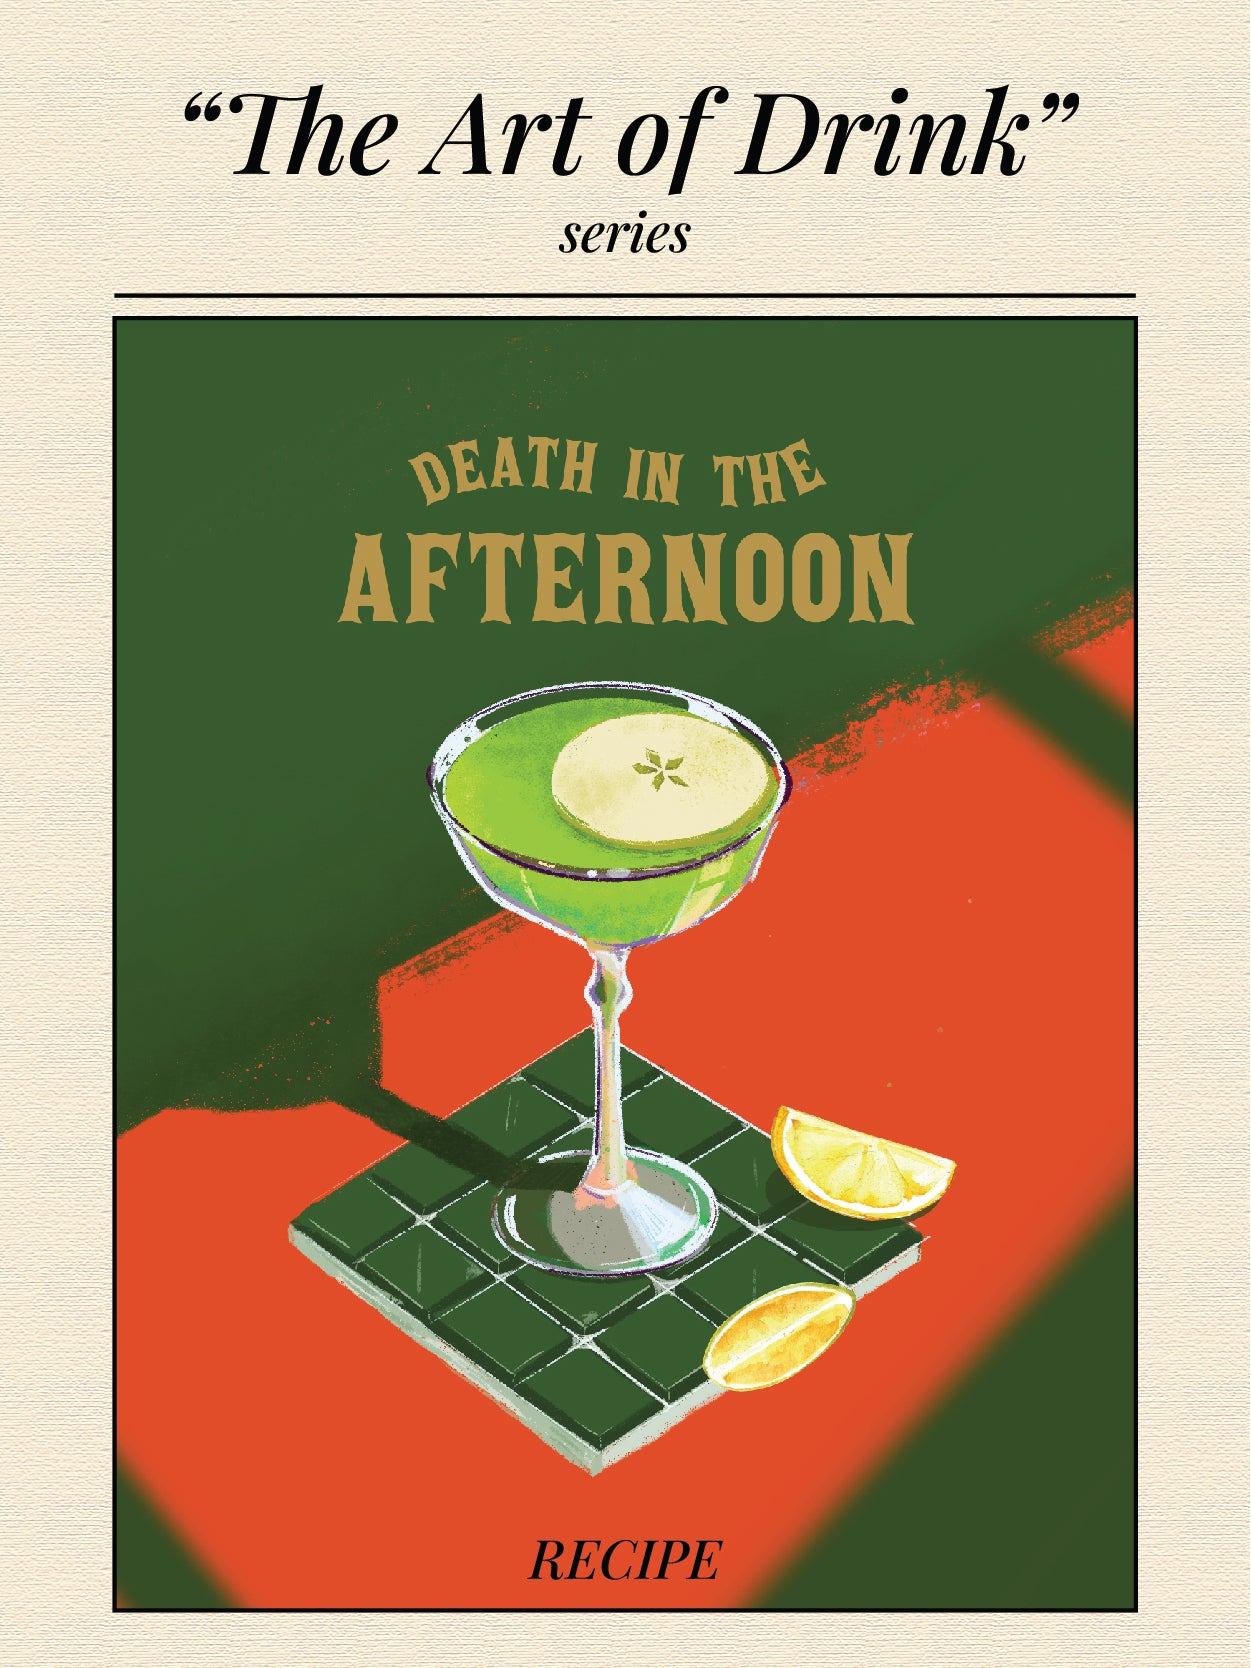 DEATH IN THE AFTERNOON - "The Art of Drink" series